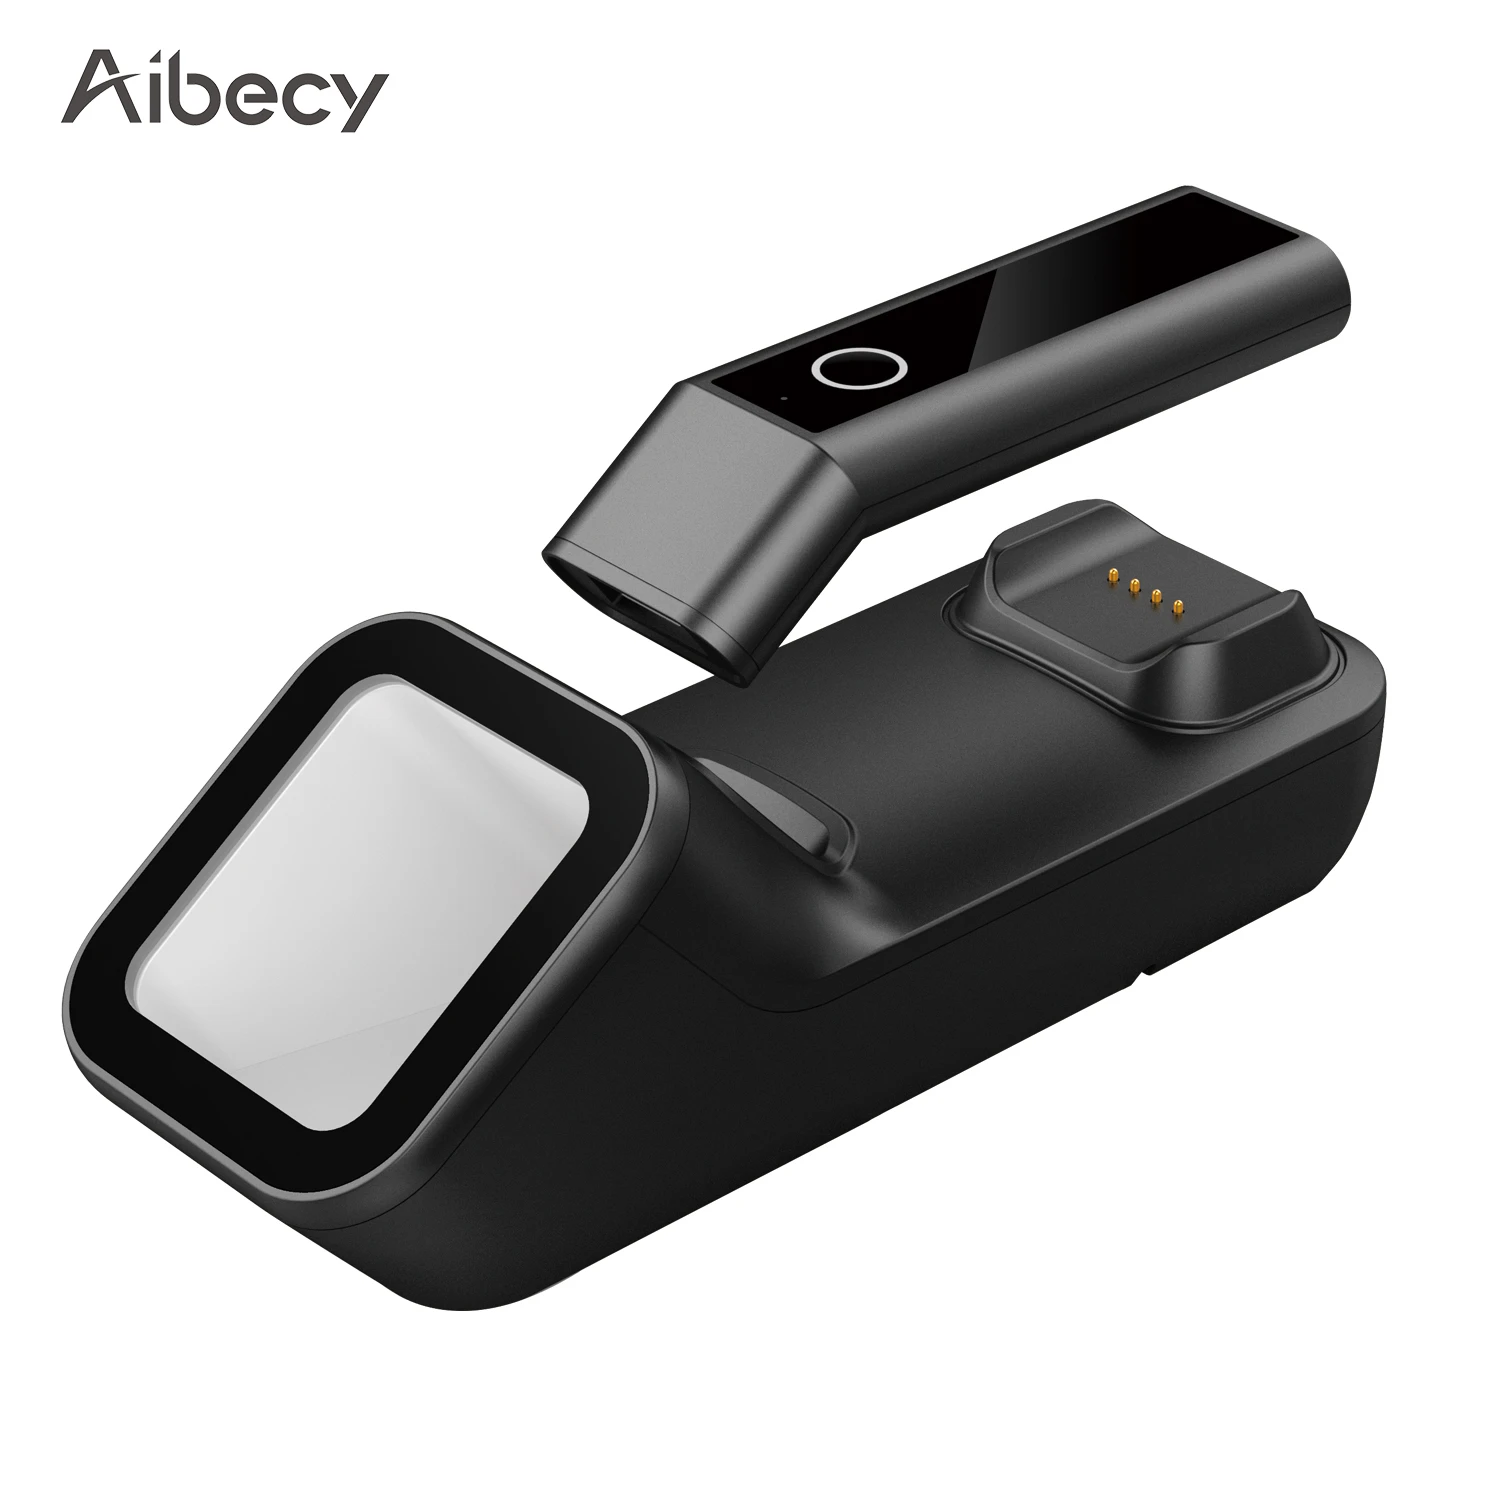 samsung scanner Aibecy 3-in-1 Barcode Scanner Handheld Bar Code Reader BT & 2.4G Wireless & USB Wired Connection with Charging & Scanning Base simple scanner